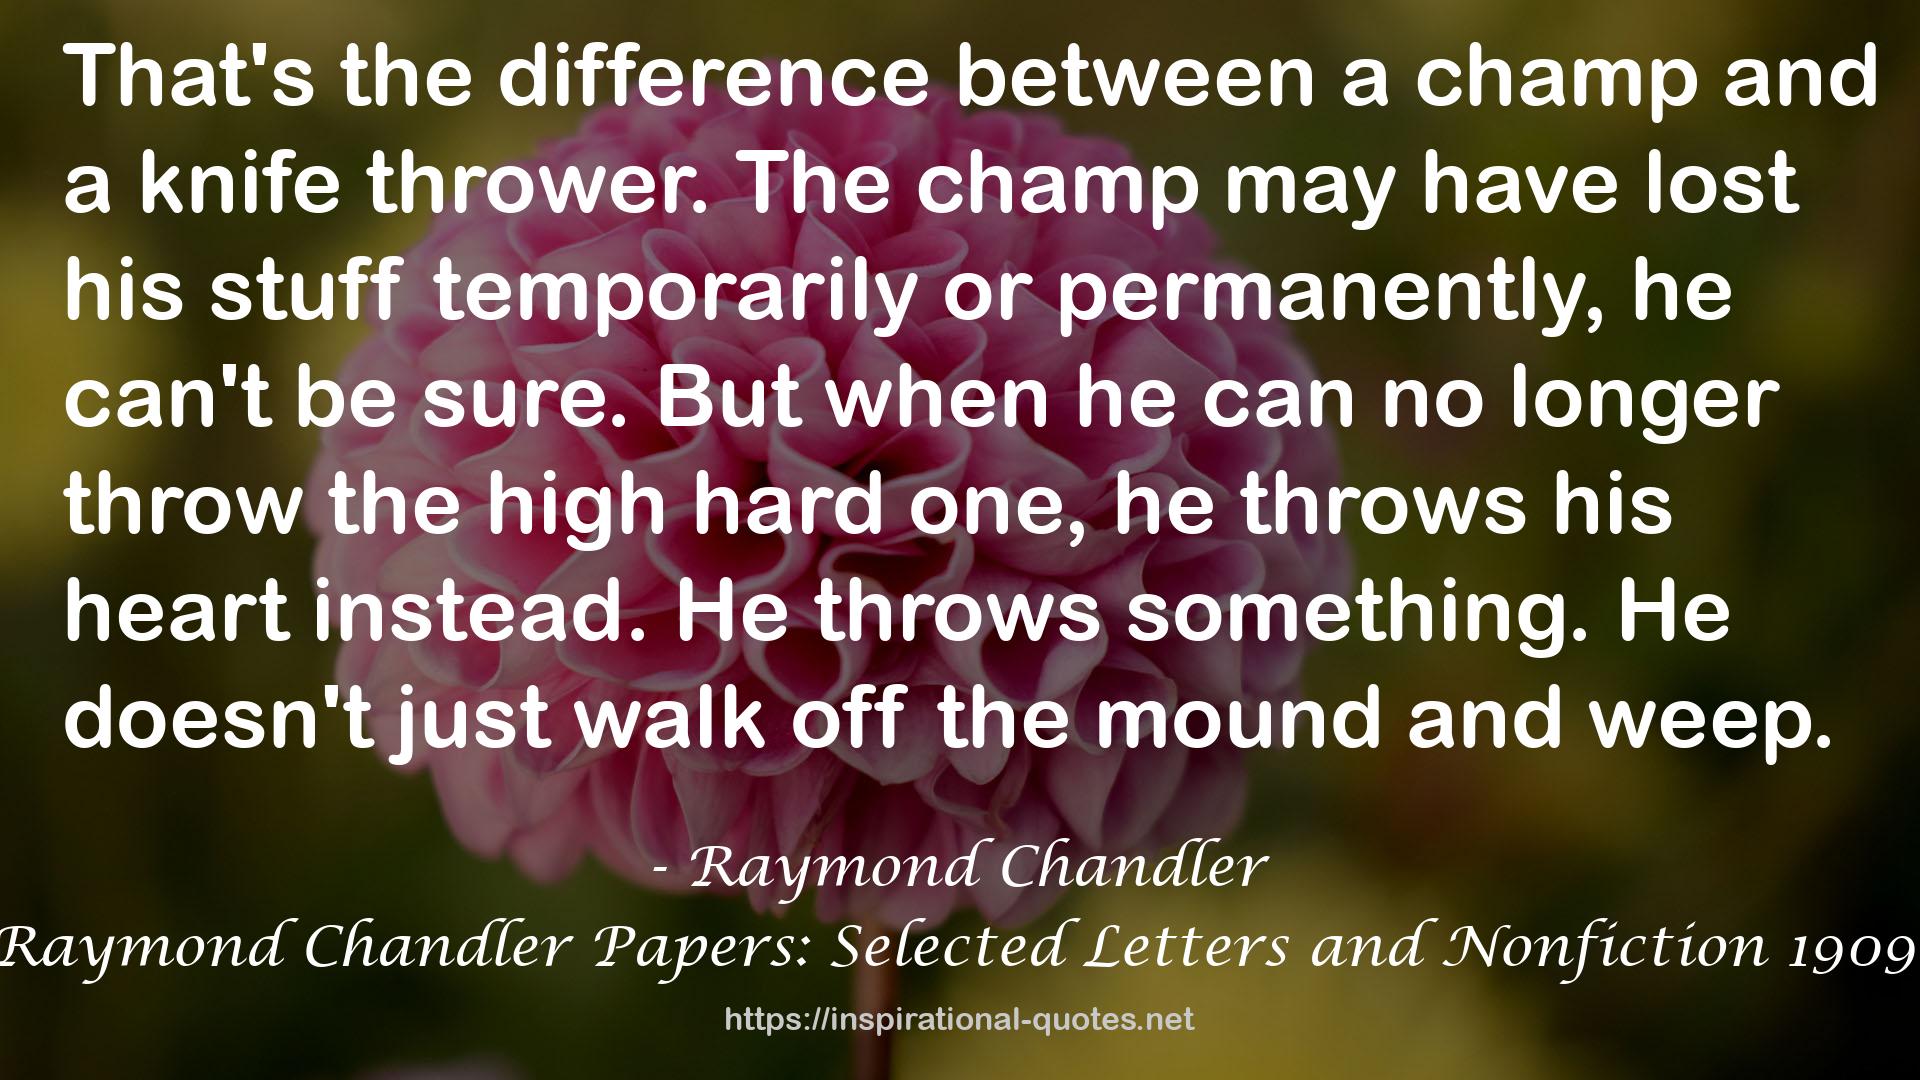 The Raymond Chandler Papers: Selected Letters and Nonfiction 1909-1959 QUOTES